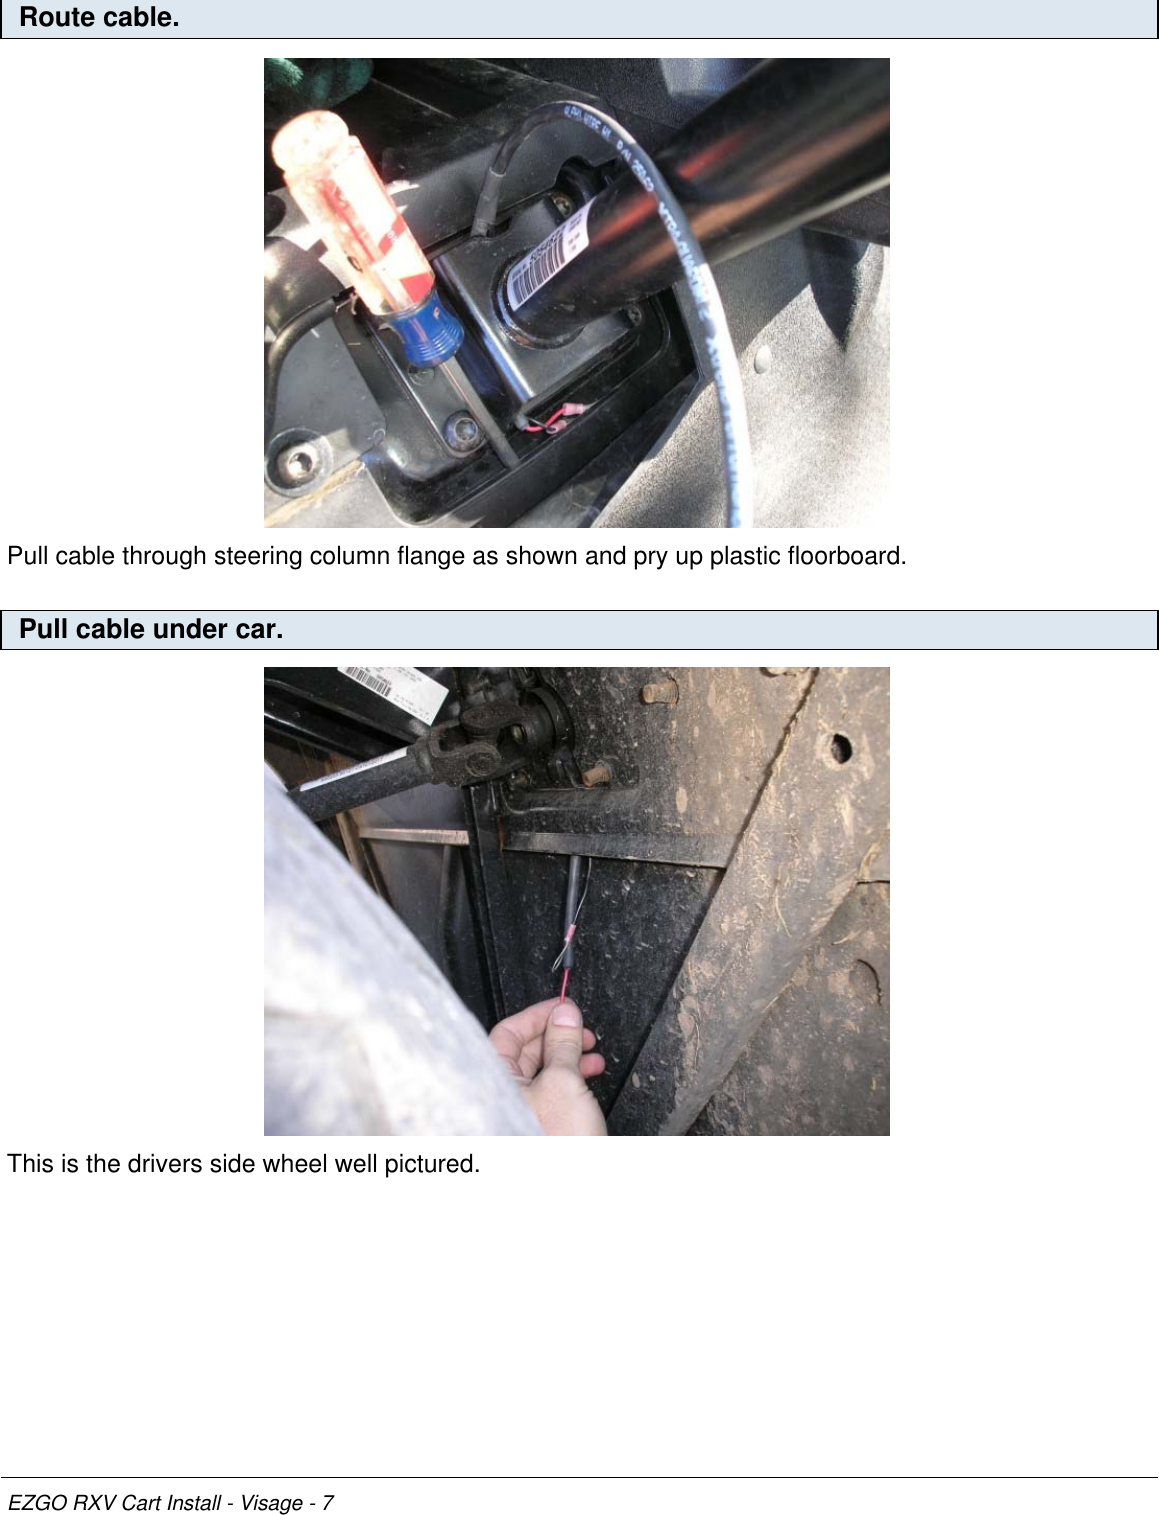 Route cable.Pull cable through steering column flange as shown and pry up plastic floorboard.Pull cable under car.This is the drivers side wheel well pictured.EZGO RXV Cart Install - Visage - 7